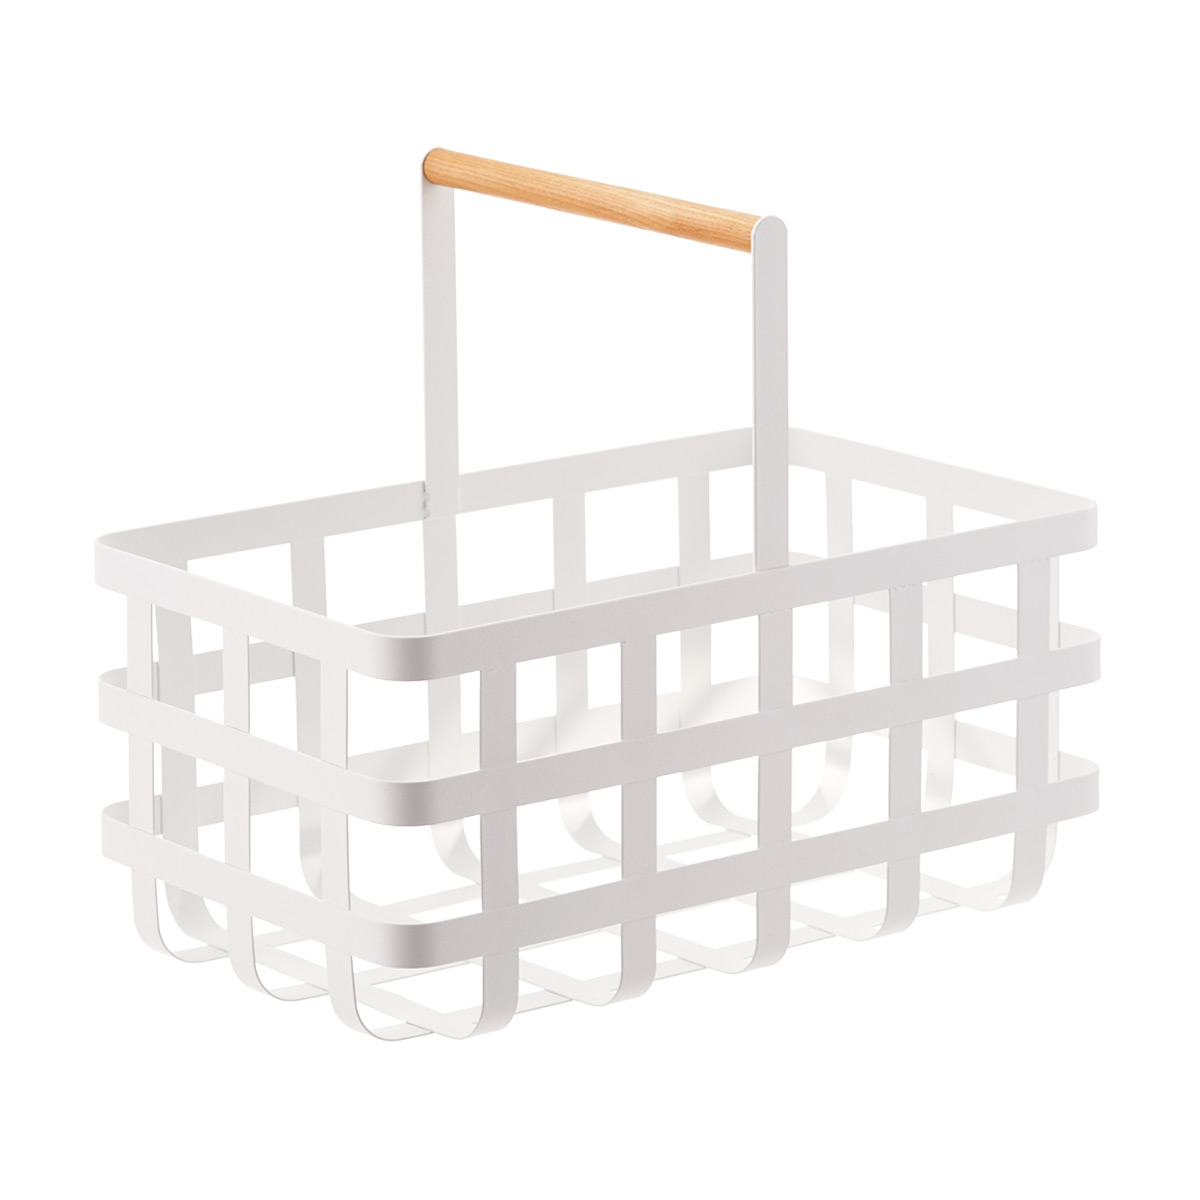 https://www.containerstore.com/catalogimages/360405/10077362-Tosca-storage-basket-with-h.jpg